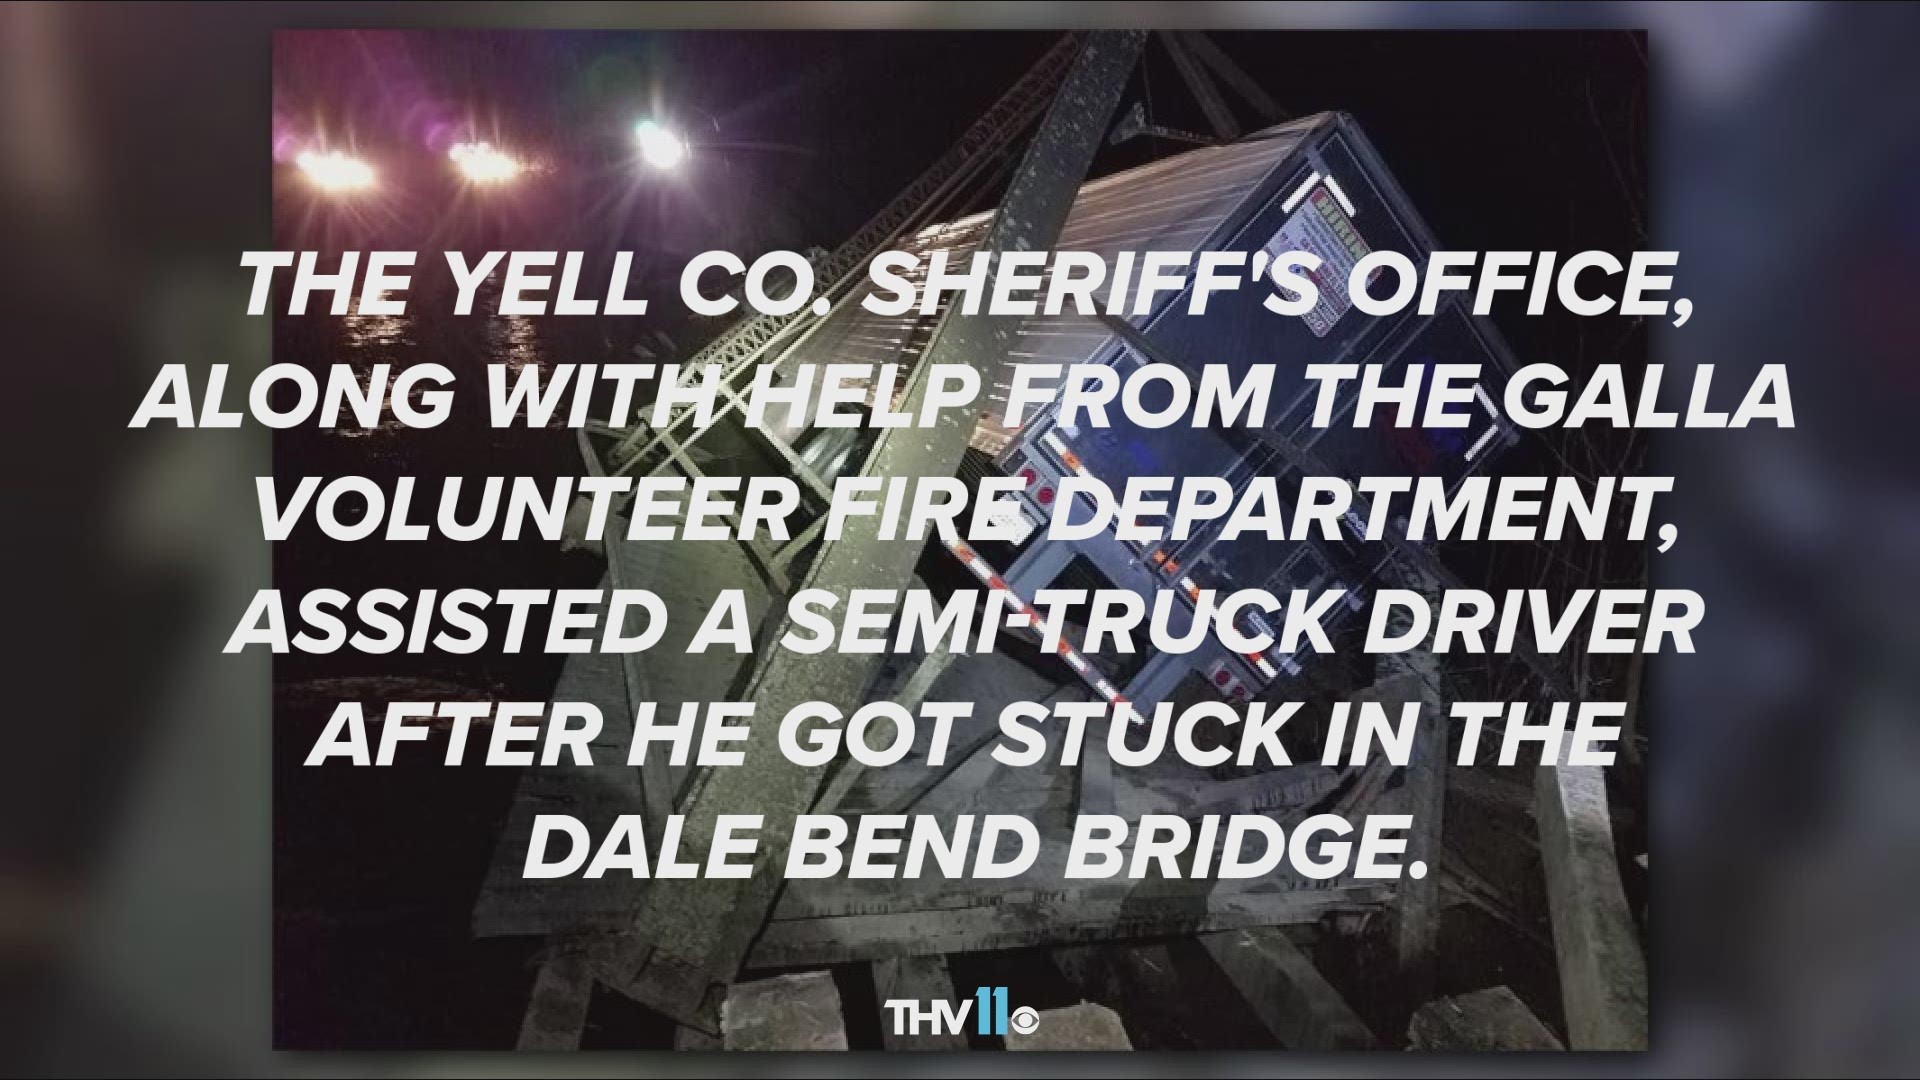 According to the Yell County Sheriff's Office, the bridge did not completely collapse, though a truck did go into the river.